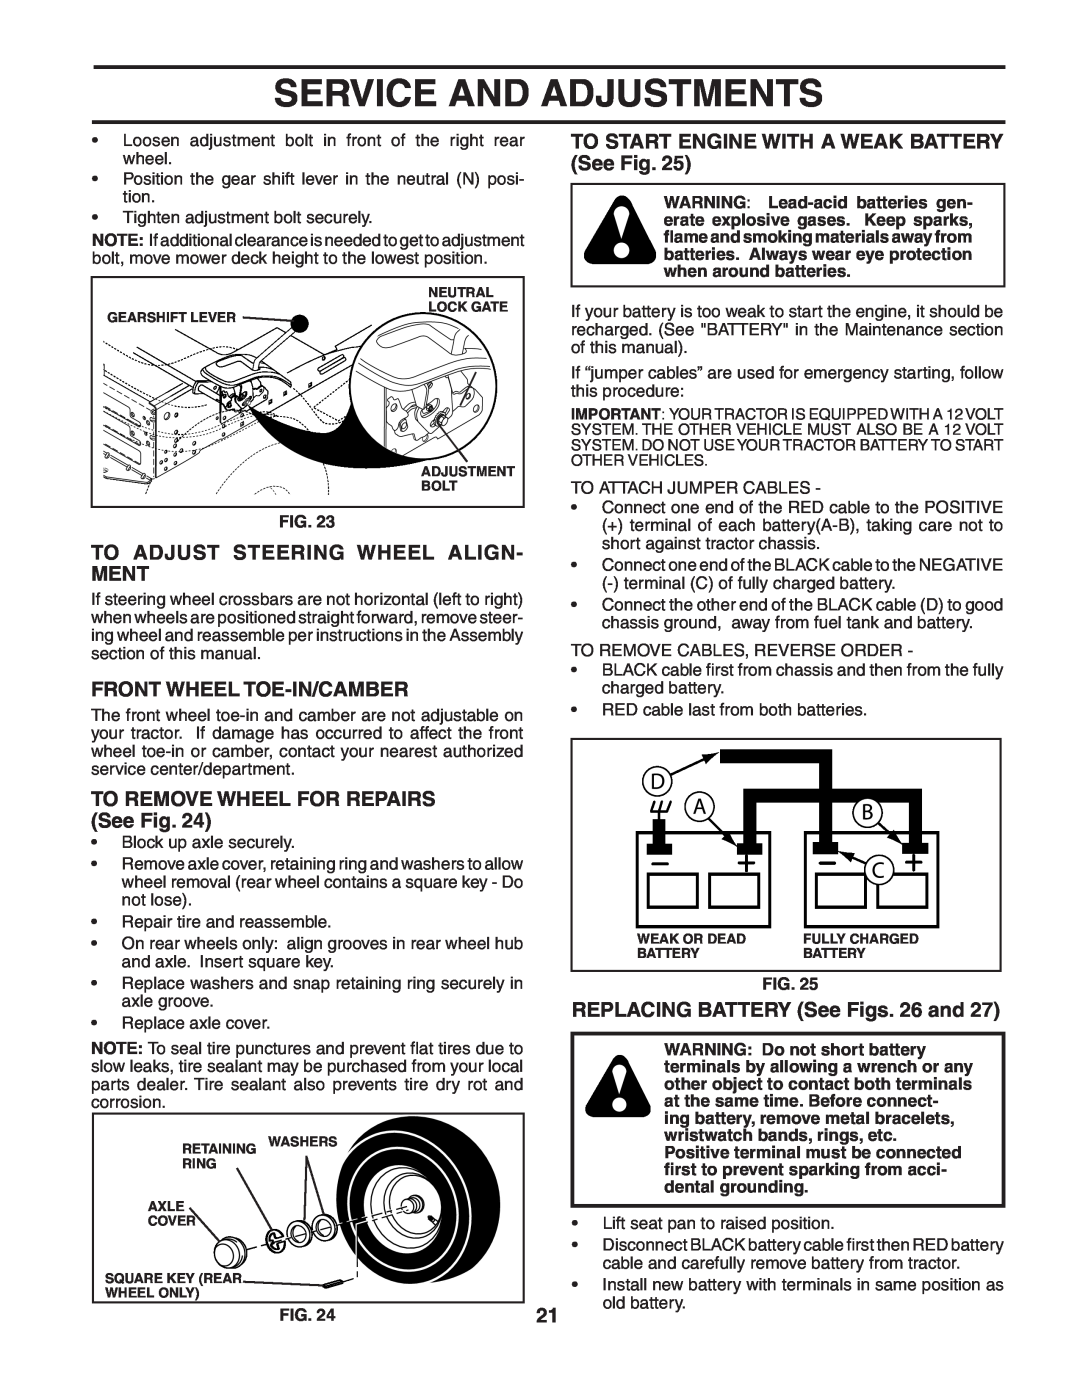 Poulan PO17542STA To Adjust Steering Wheel Align- Ment, Front Wheel Toe-In/Camber, TO REMOVE WHEEL FOR REPAIRS See Fig 